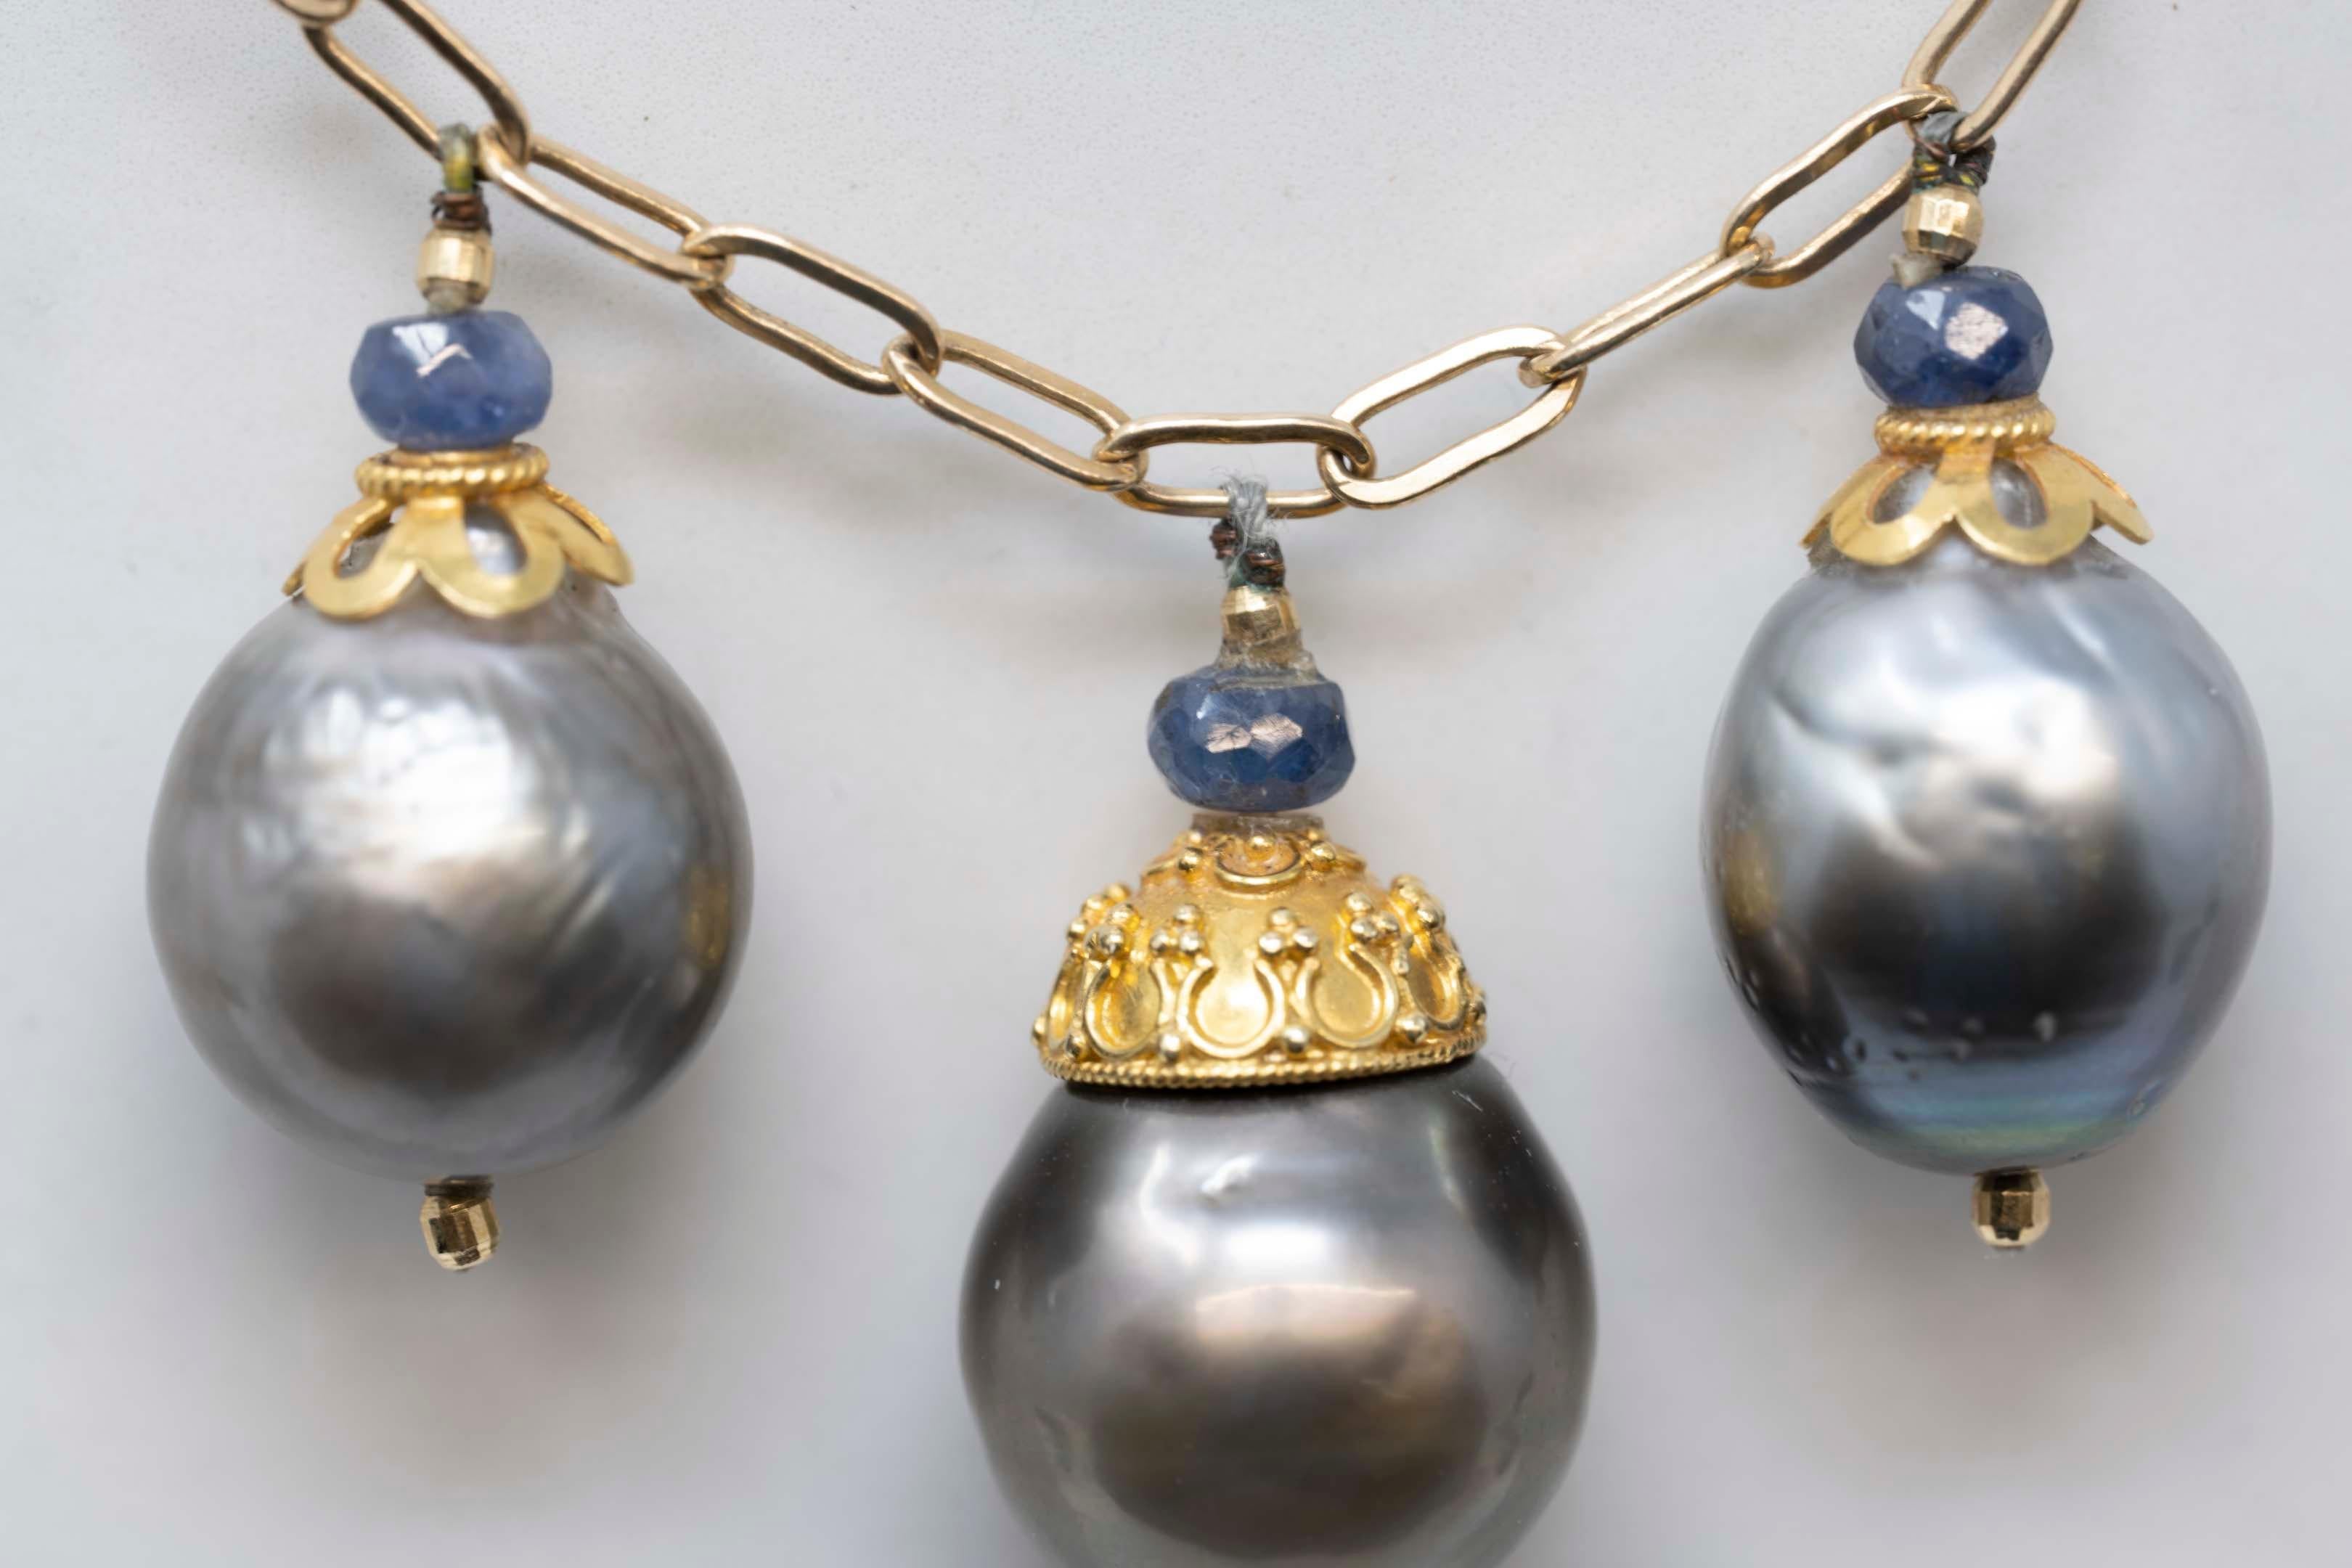 Three Baroque Cultured Tahiti Pearls & 14k Gold Necklace In Excellent Condition For Sale In Montreal, QC